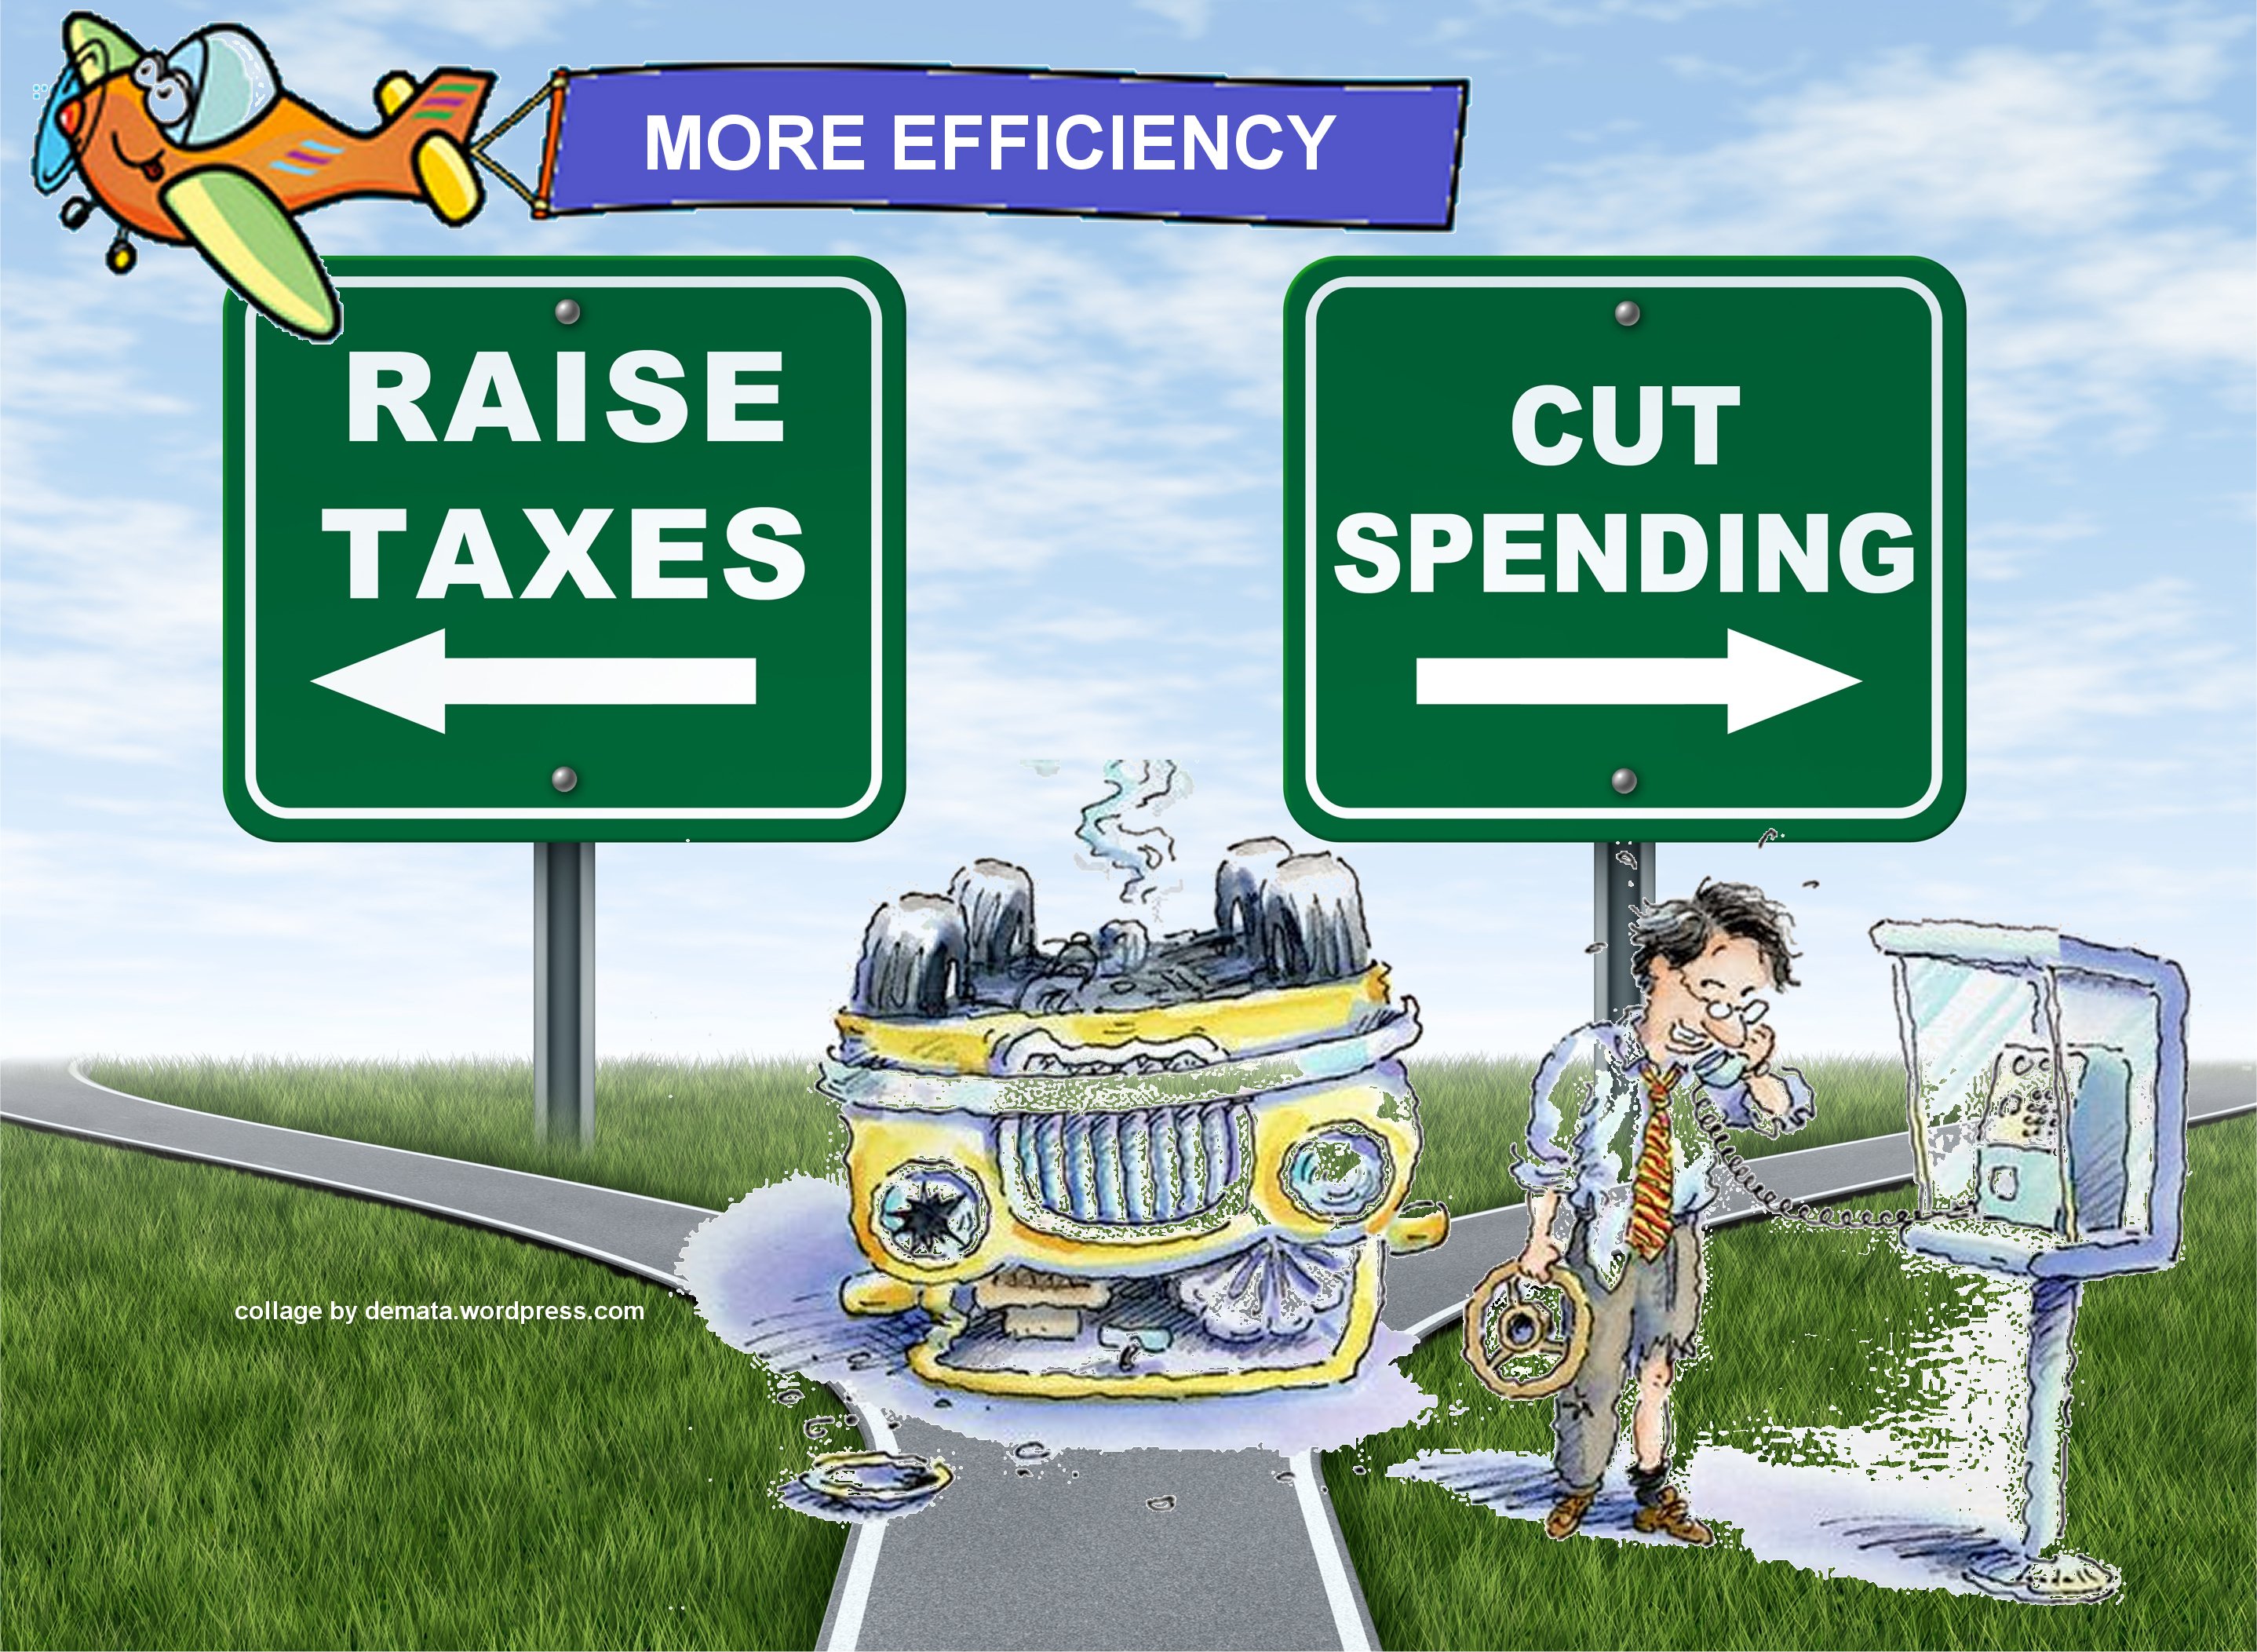 Demata - Fiscal Cliff More Efficiency